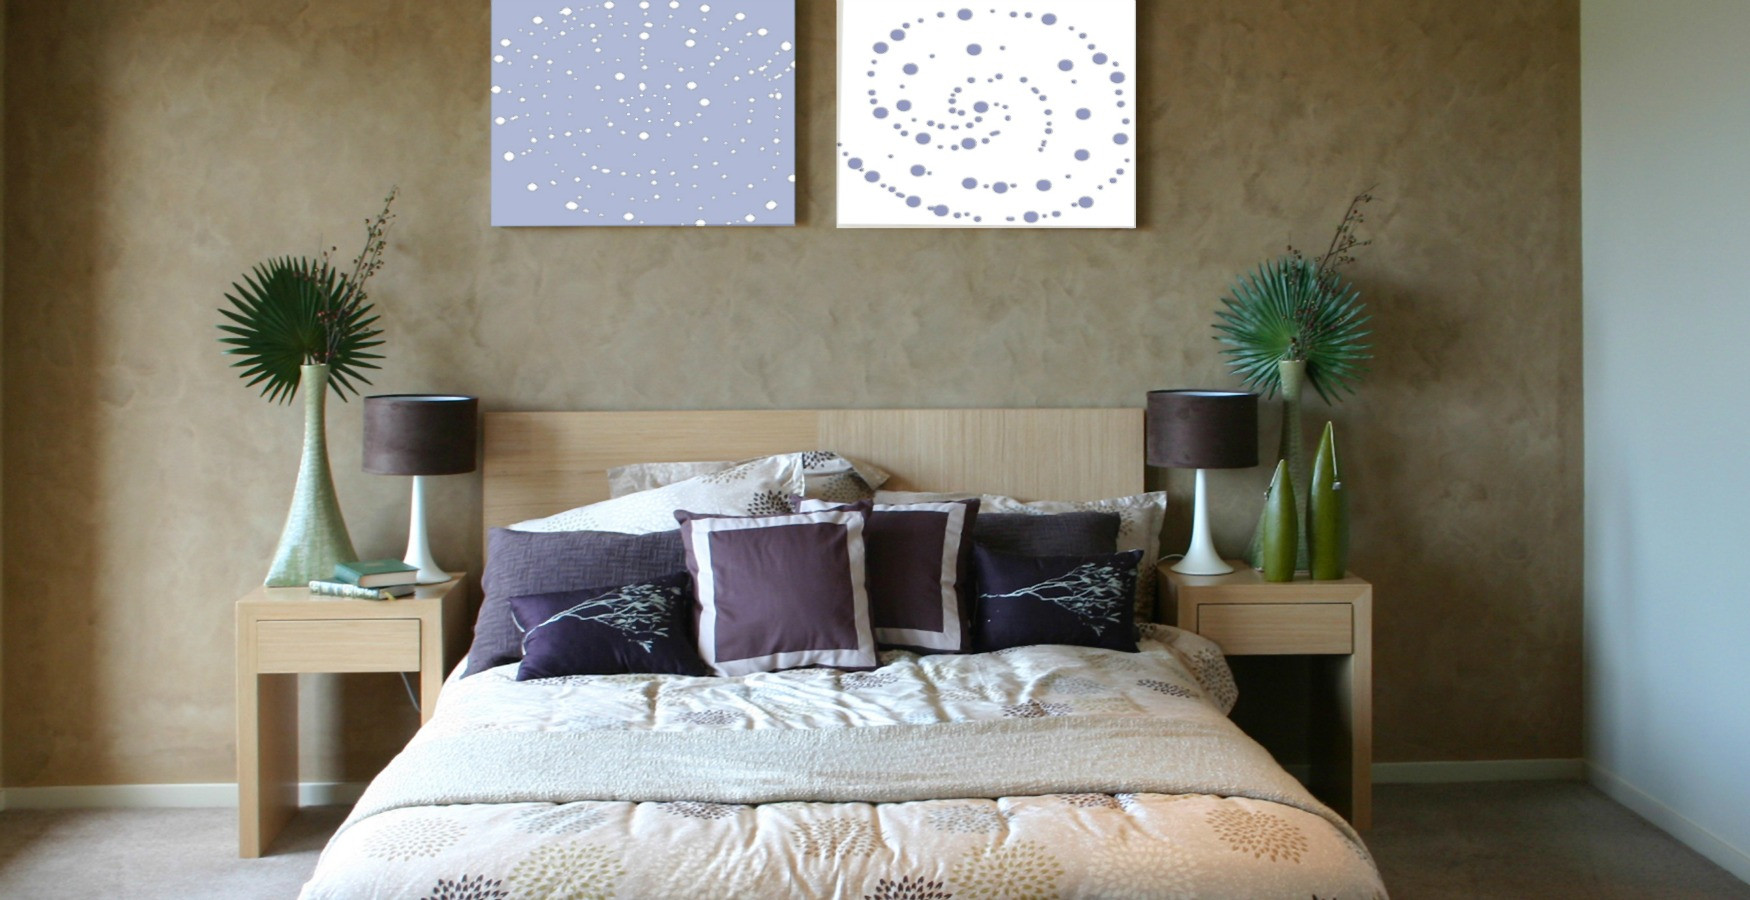 Feng Shui Small Bedroom
 Sleep Better With These Simple Feng Shui Bedroom Tips